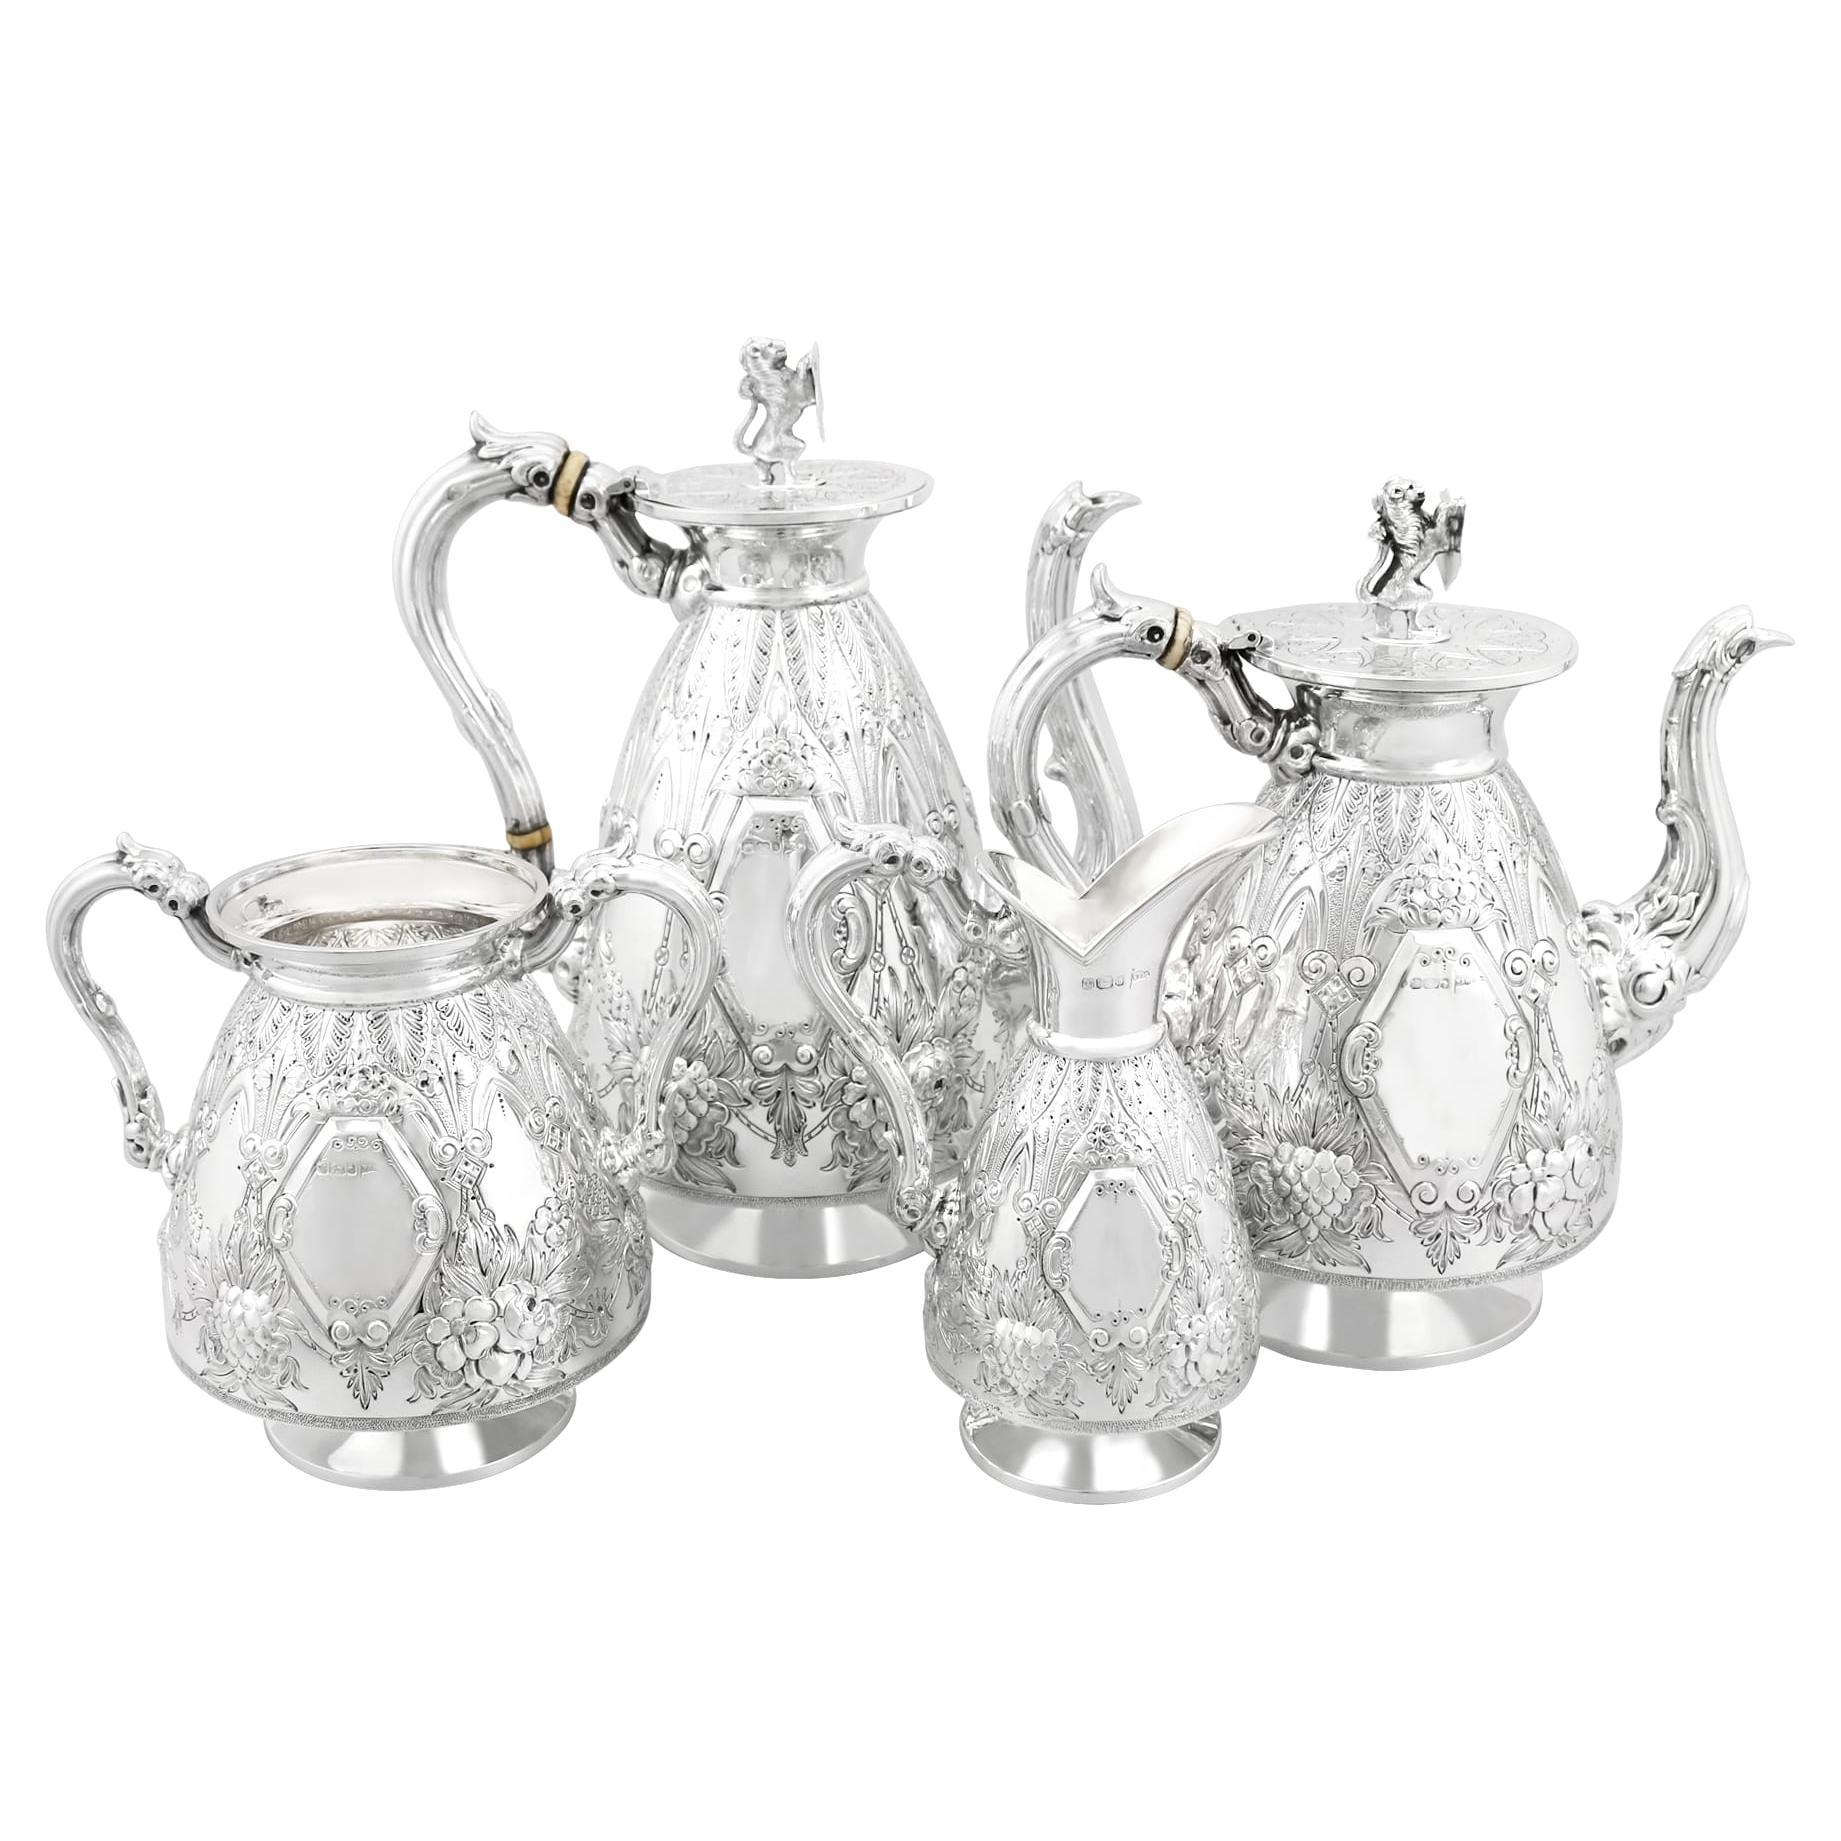 Antique Sterling Silver Four-Piece Tea and Coffee Service